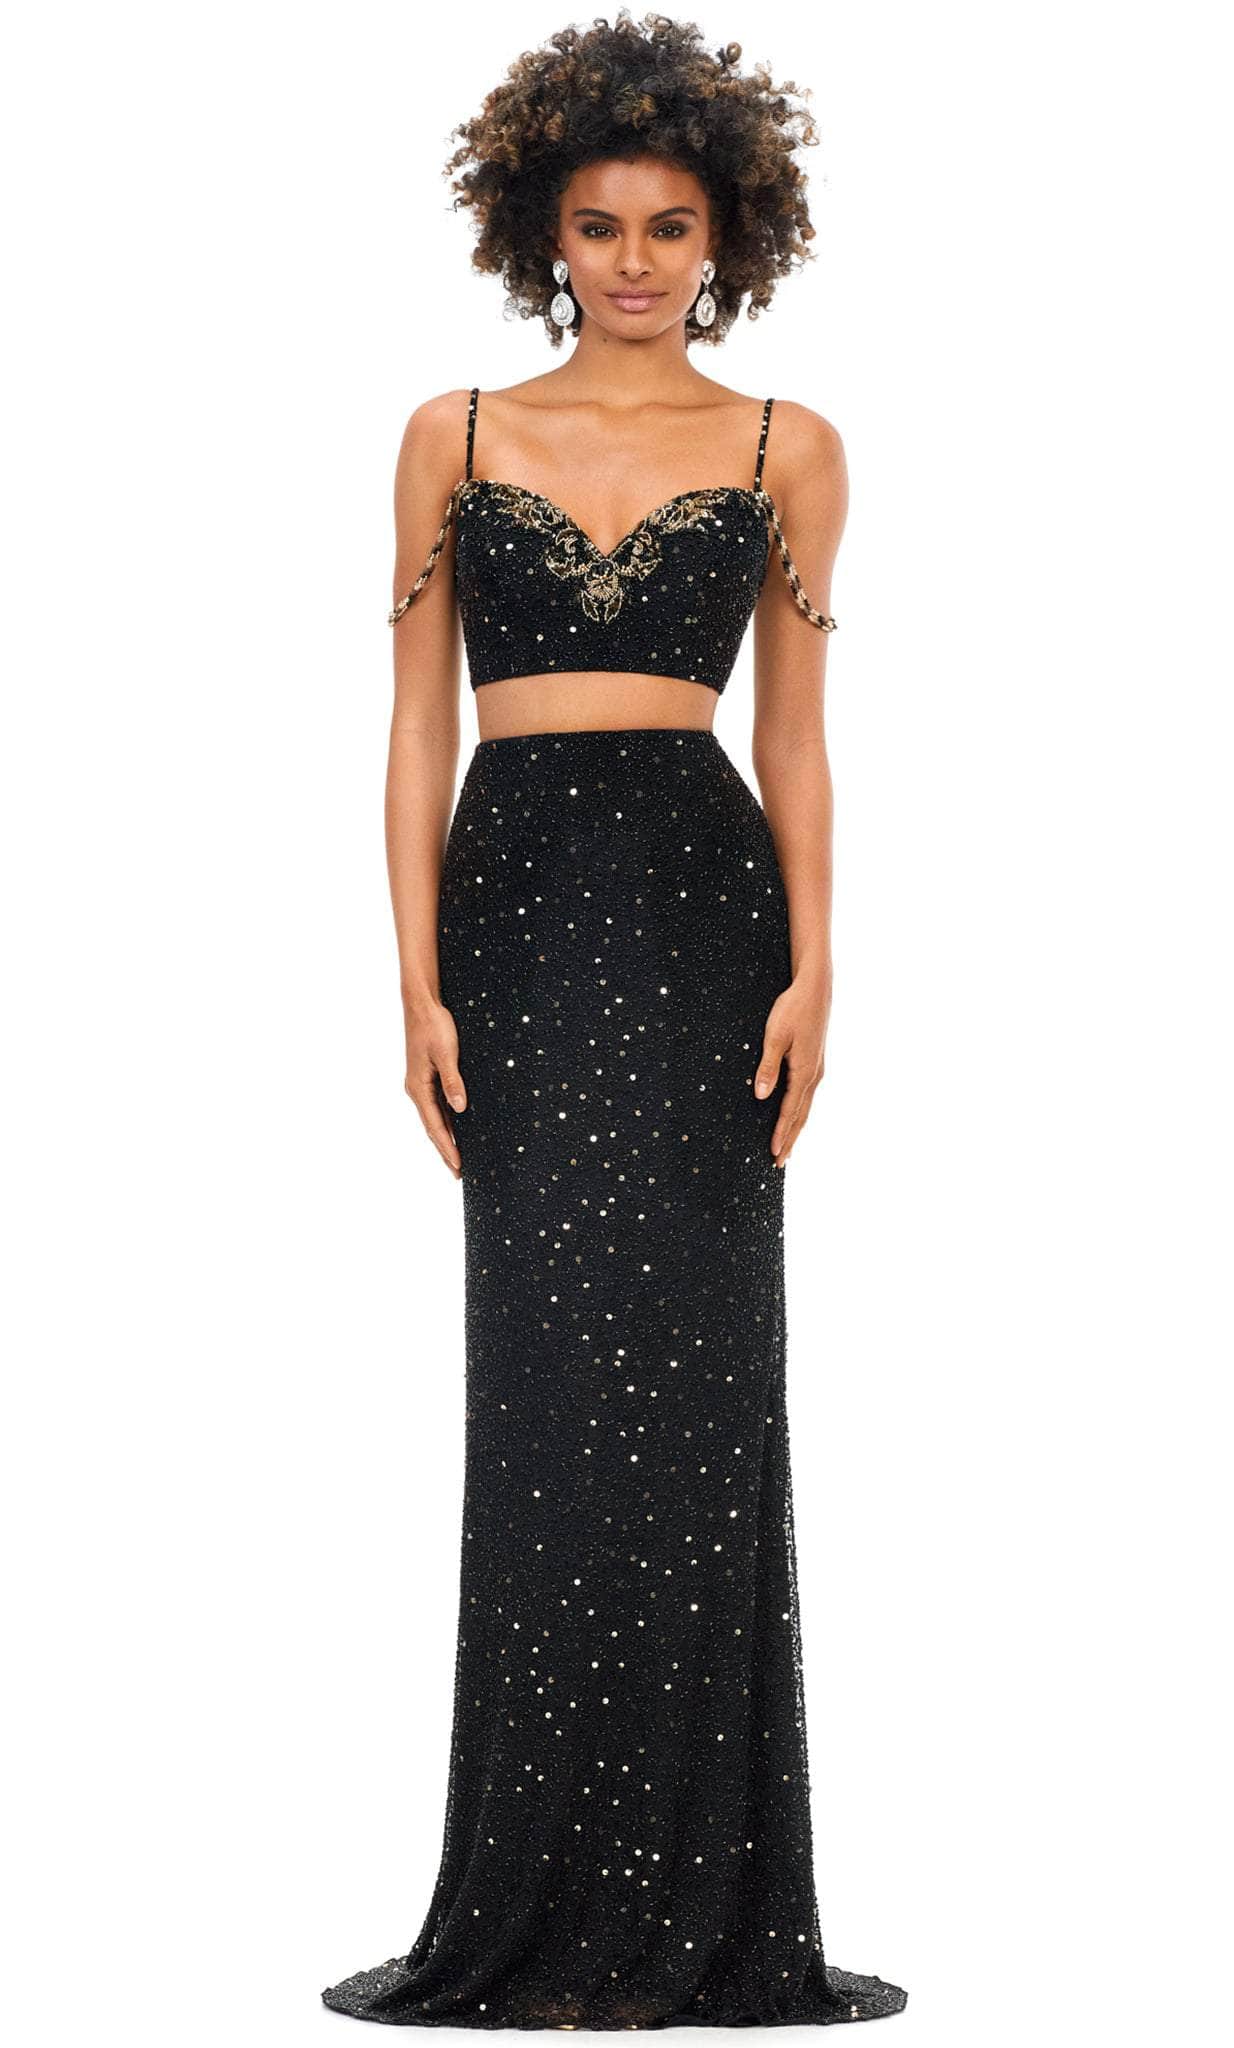 Image of Ashley Lauren 11353 - Sparkling Two-Piece Prom Gown